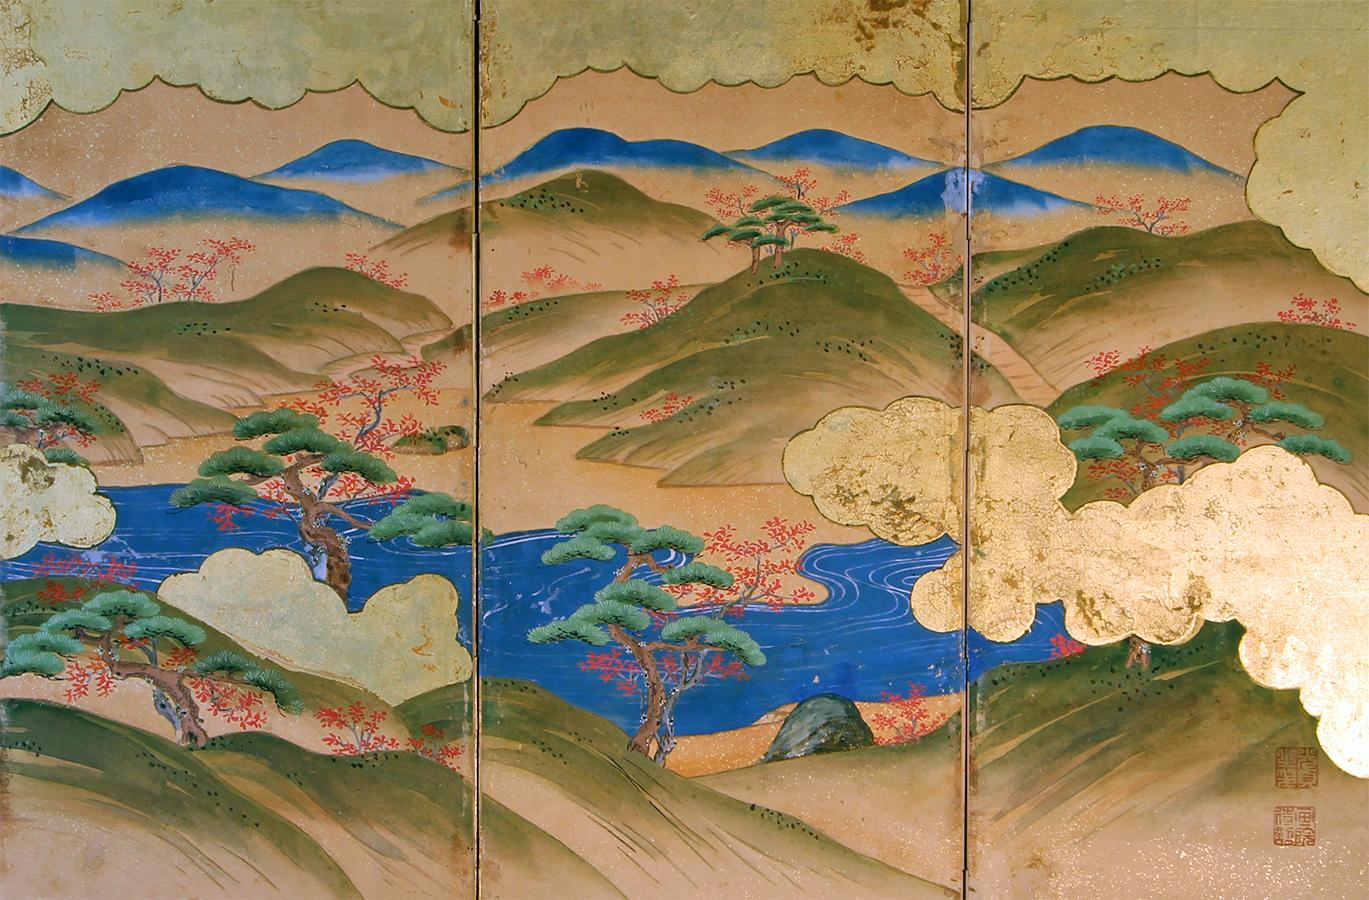 Hand-Painted Japanese Landscape of the 19th Century, Small Six Folding Screen Kano School